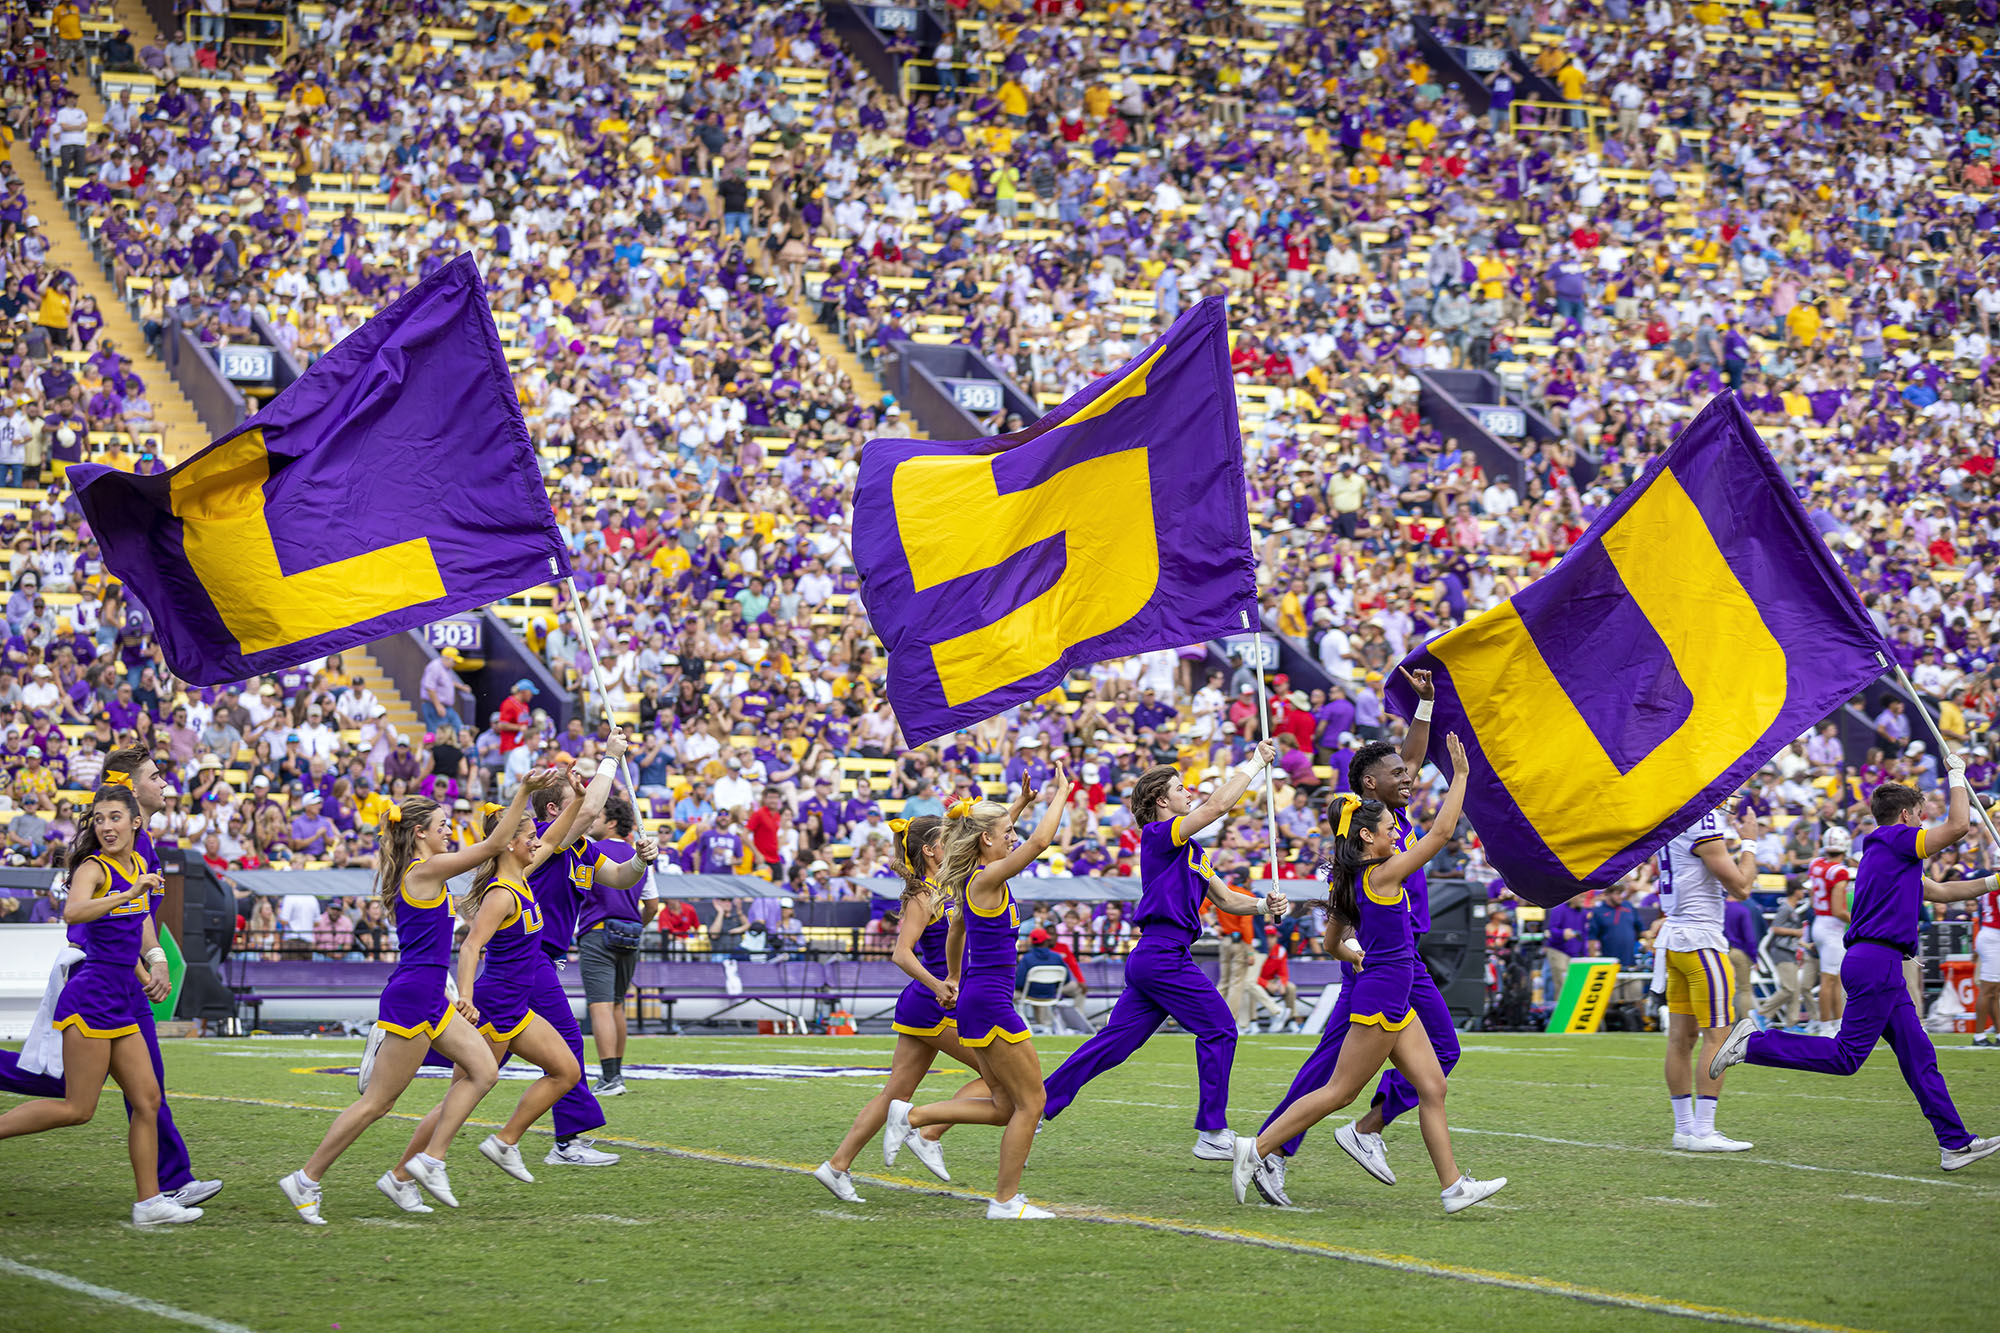 LSU Colors Purple and Gold a Proud Tradition Since 1893